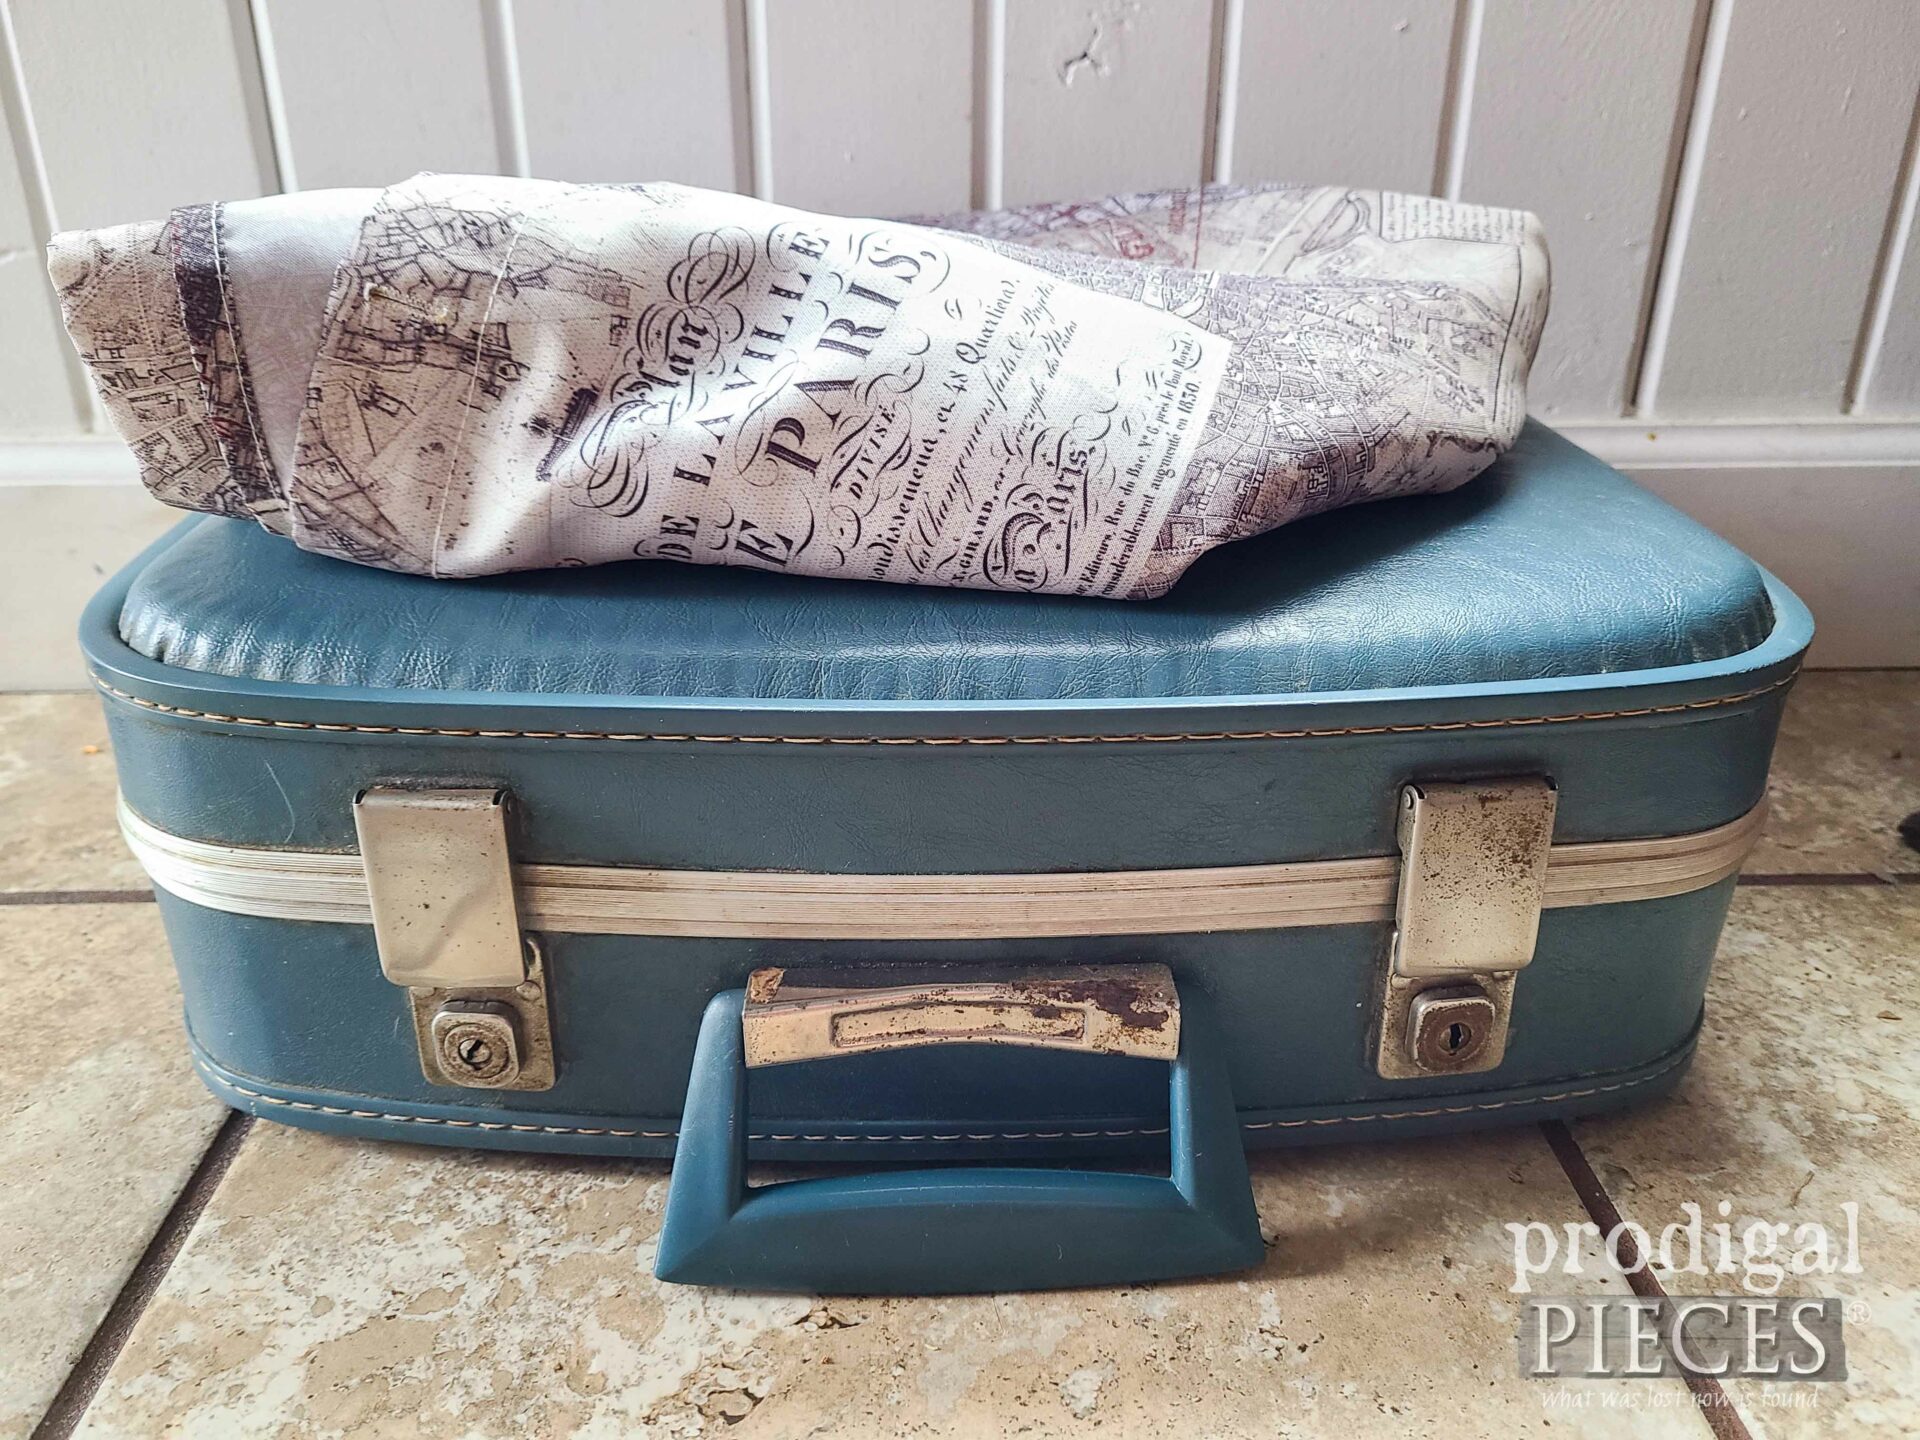 Shower Curtain and Vintage Suitcase Upcycled | prodigalpieces.com #prodigalpieces